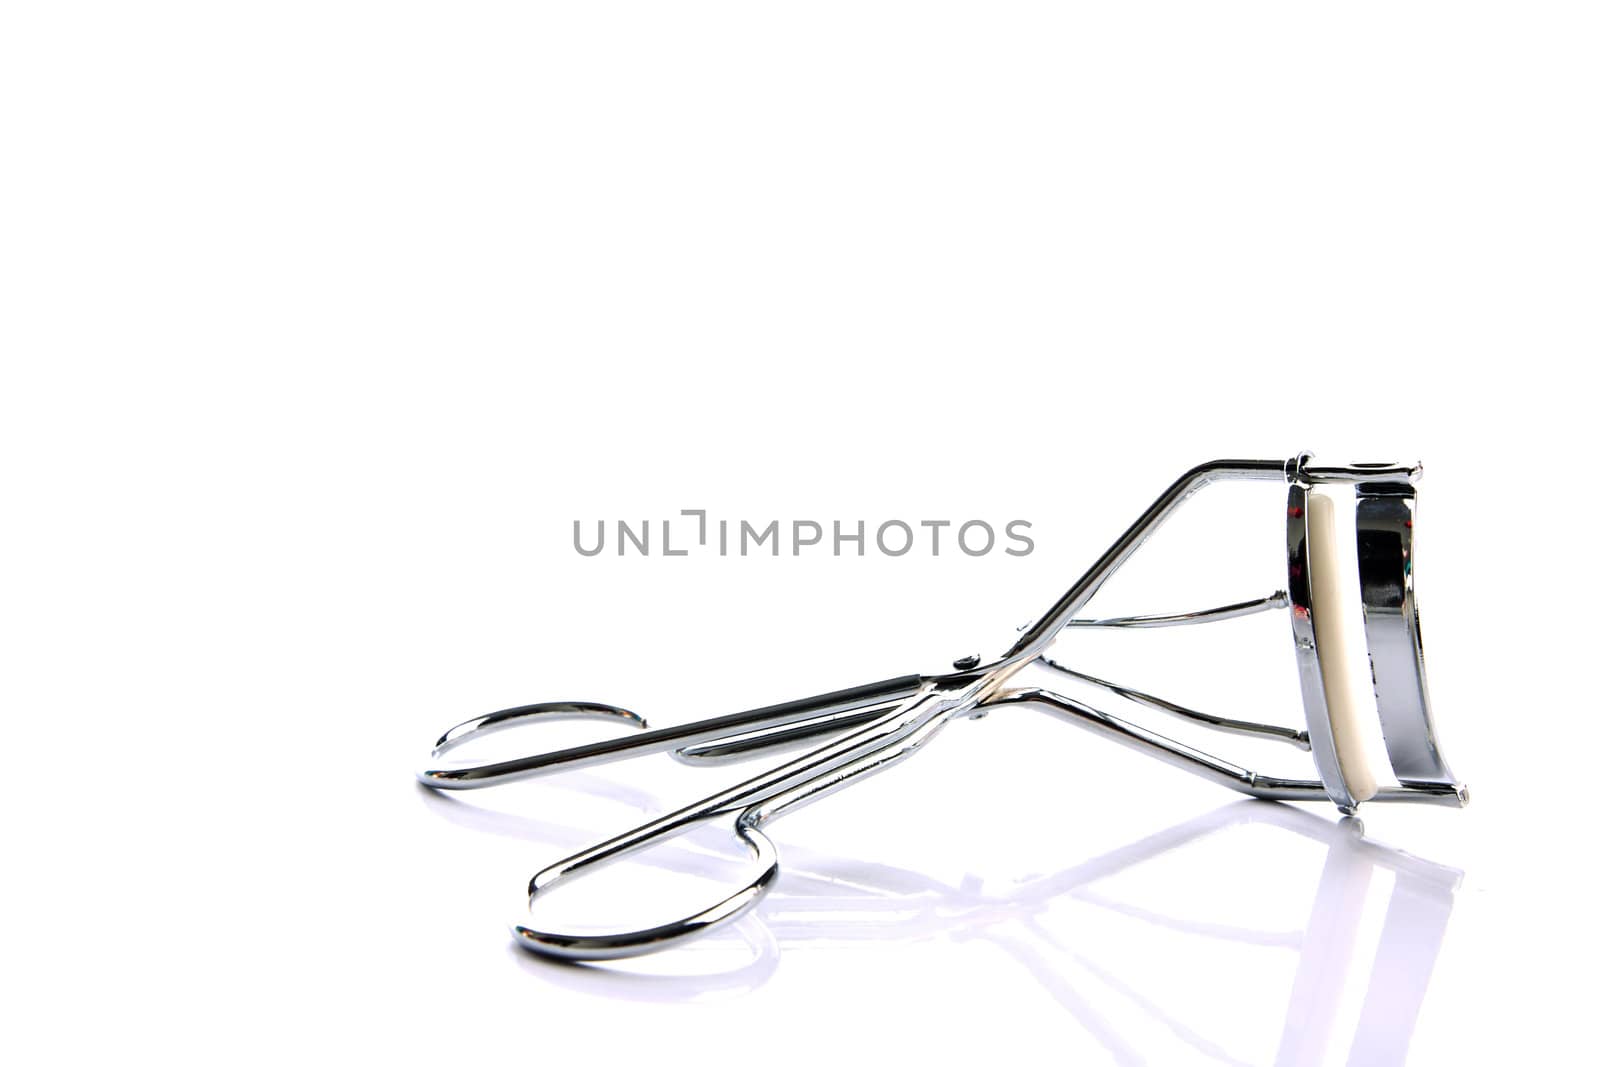 Eyelash curler on the white background with copy space